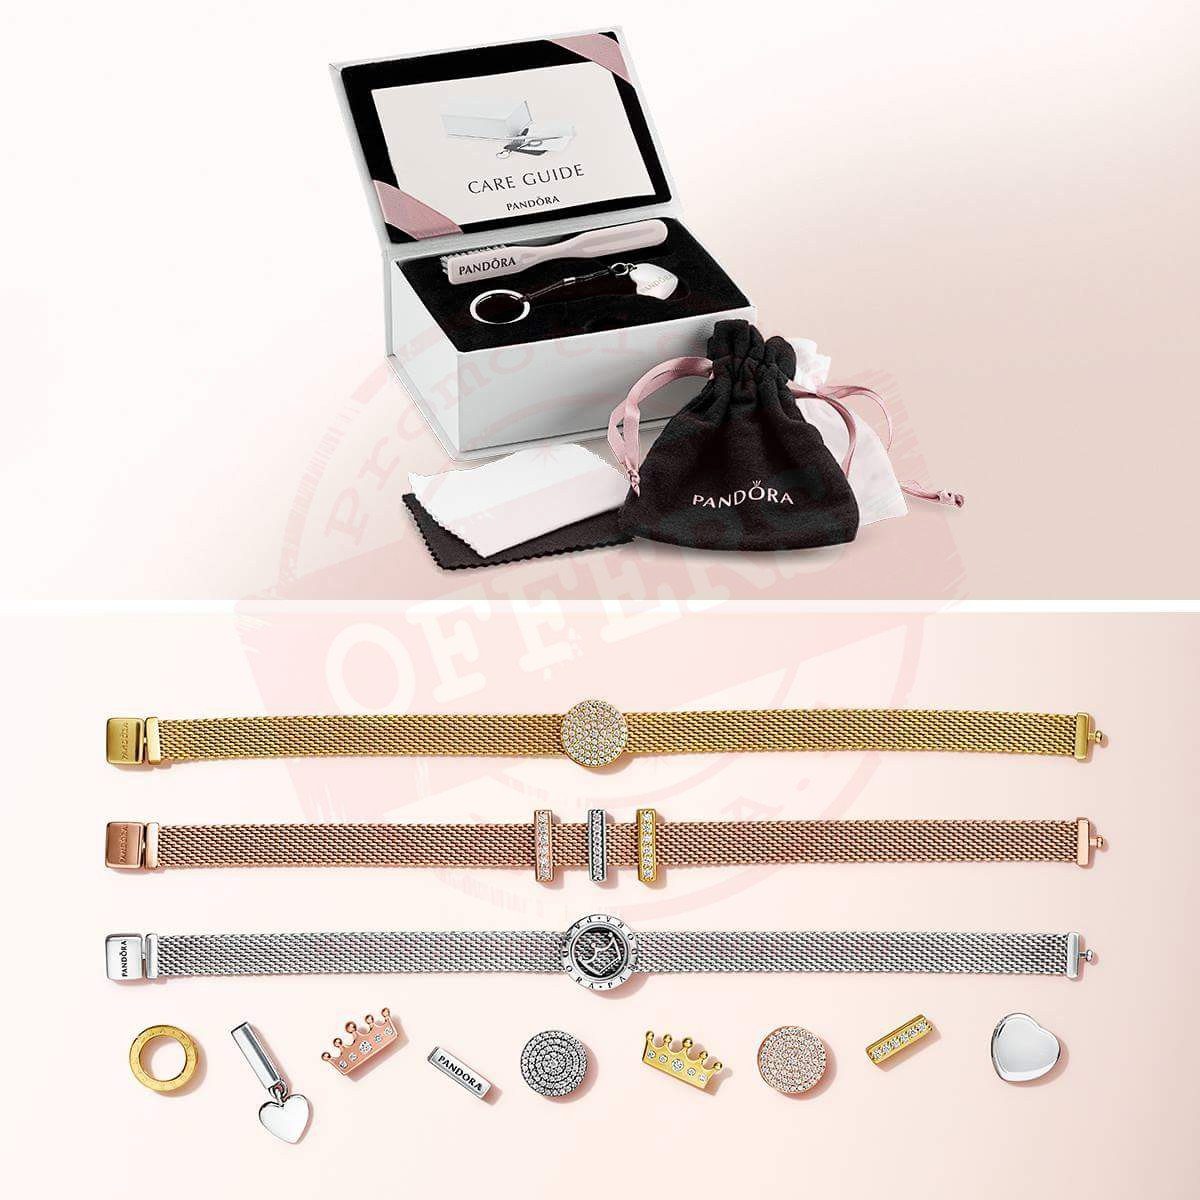 Care for your New Reflexions jewellery! Receive a Care Kit when you spend AED 500, including one item from the PANDORA Reflexions collection.